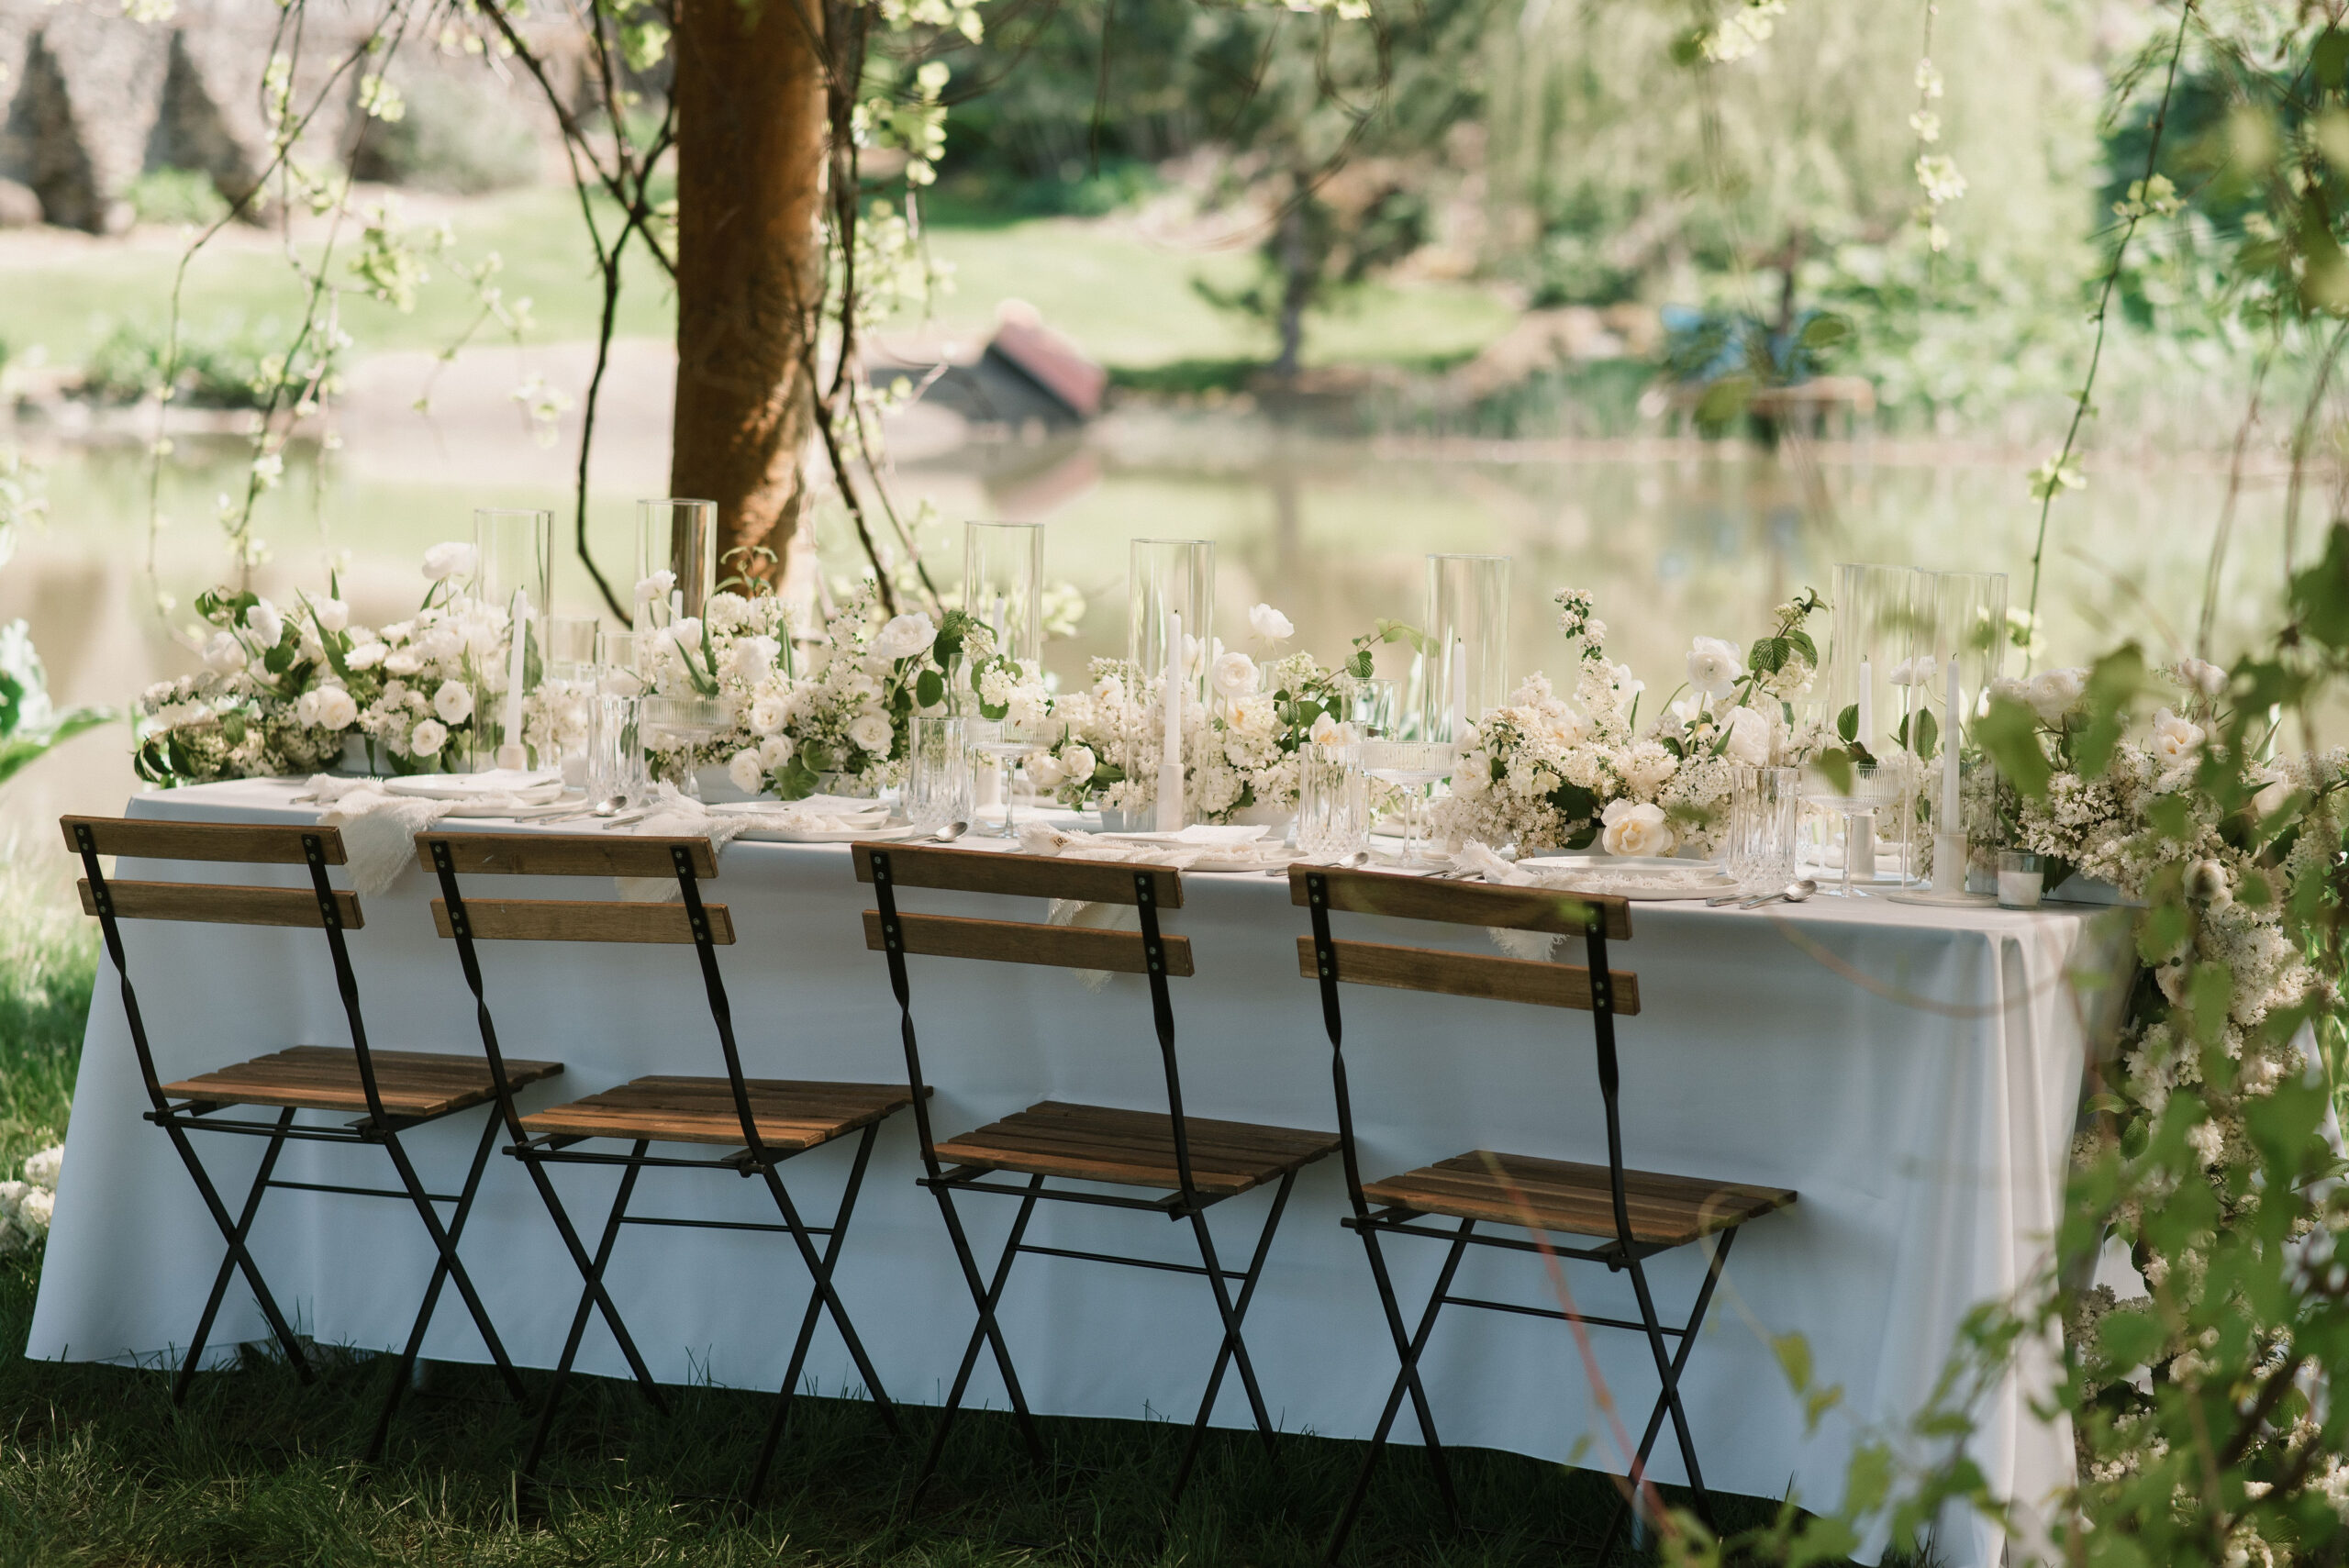 reception table details from european-inspired wedding venue photos